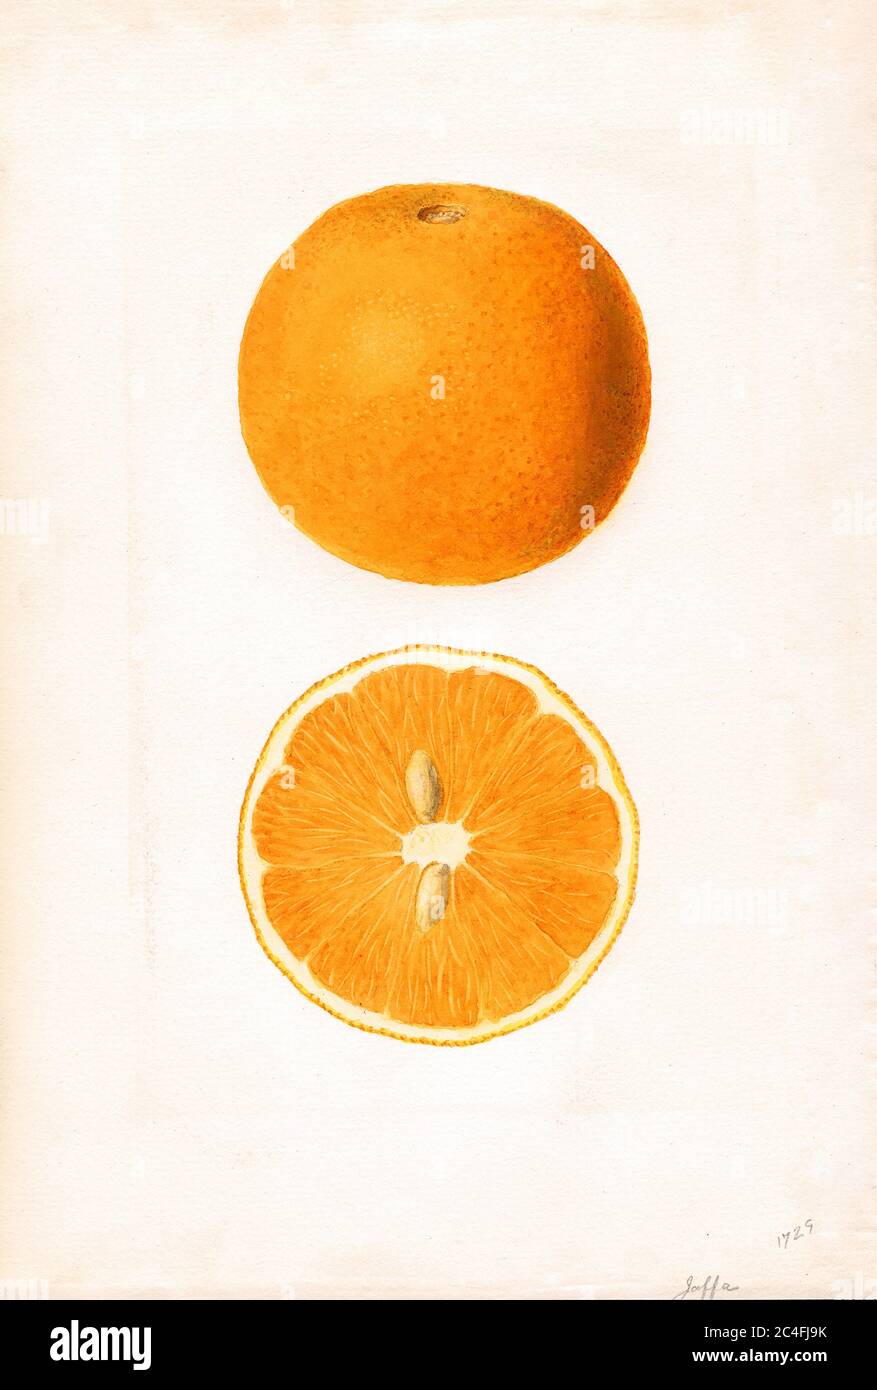 Oranges, Jaffa variety, Citrus sinensis, Orlando, Orange County, Florida, USA, Watercolor Illustration by James Marion Shull, U.S. Department of Agriculture Pomological Watercolor Collection, 1937 Stock Photo